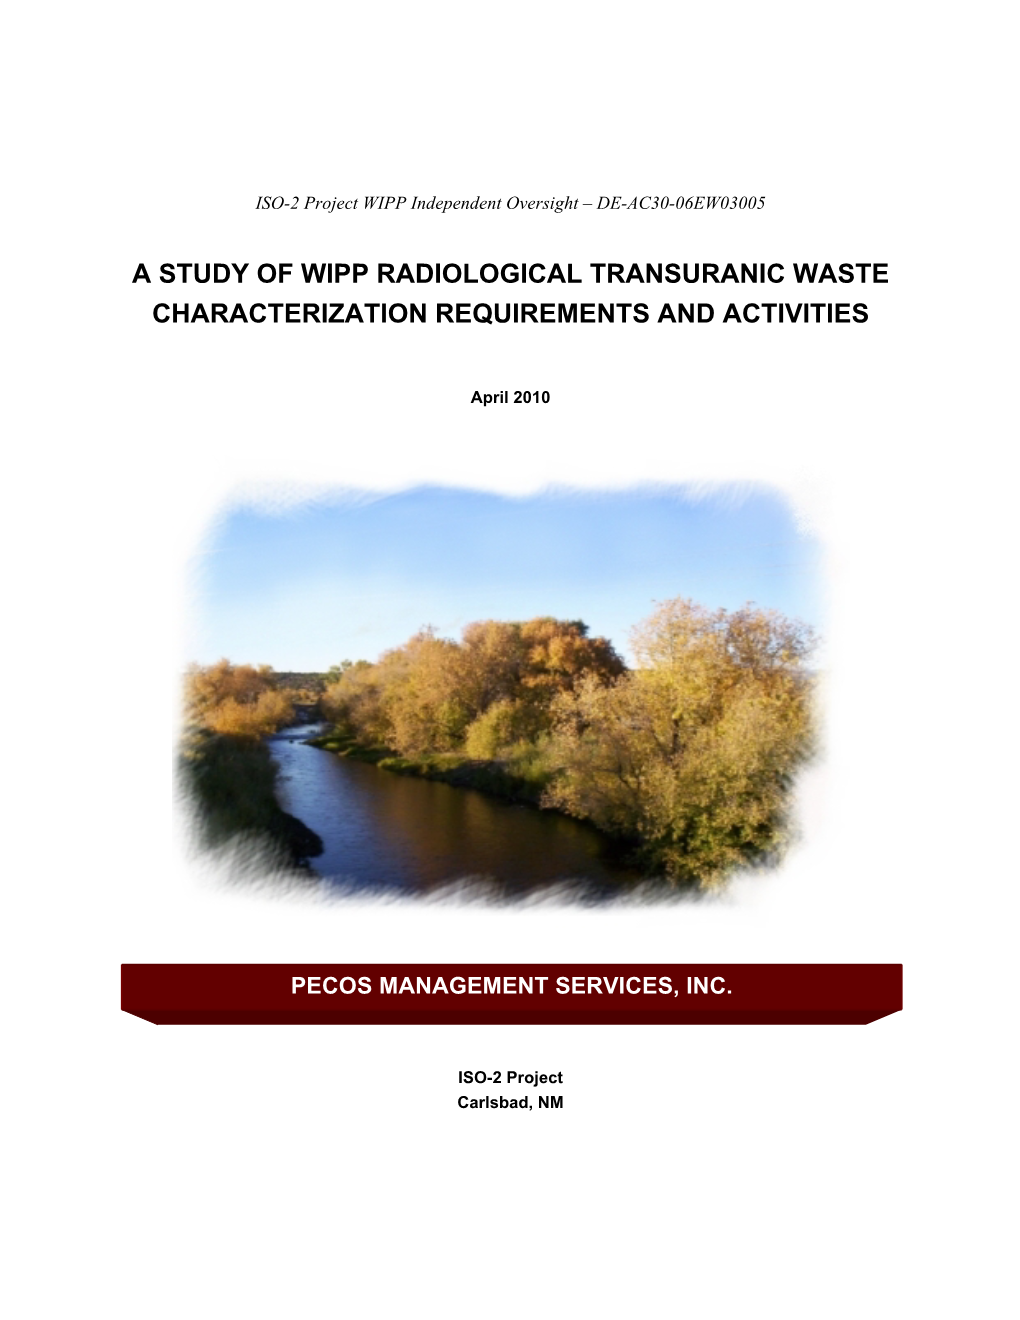 A Study of Wipp Radiological Transuranic Waste Characterization Requirements and Activities